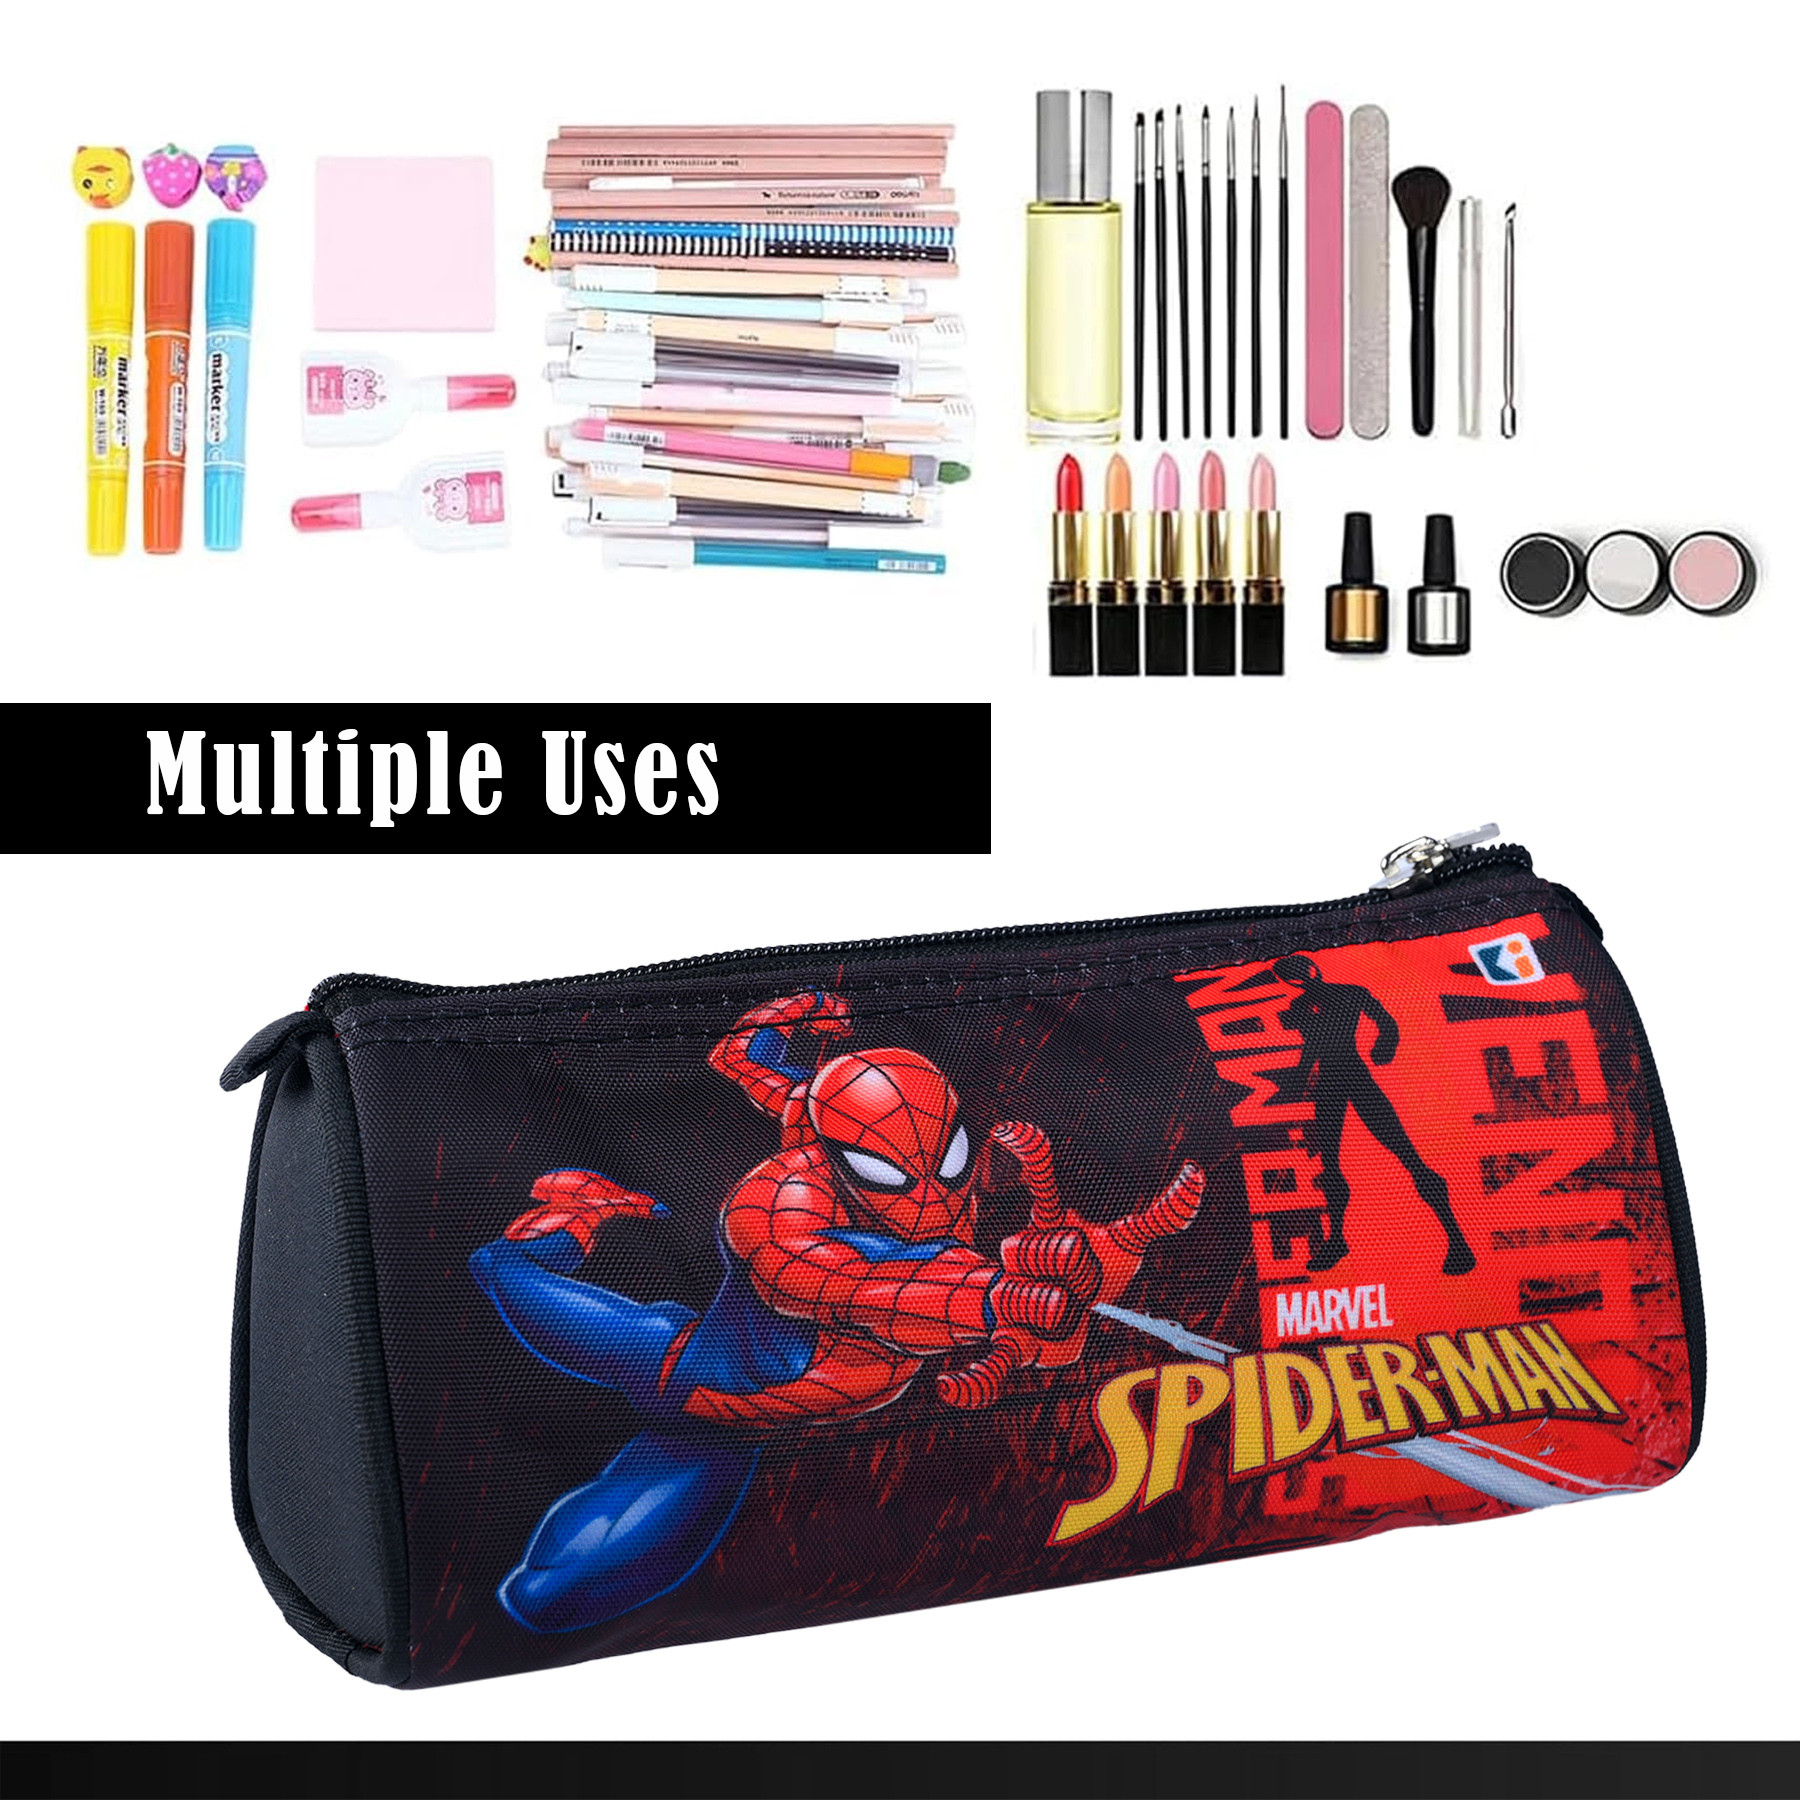 Kuber Industries Pencil Pouch | Multi-Purpose Travel Pouch | Kids Stationary Storage Bag | Pencil Utility School Pouches | Geometry Box | Marvel Spider-Man | Large | Red & Black